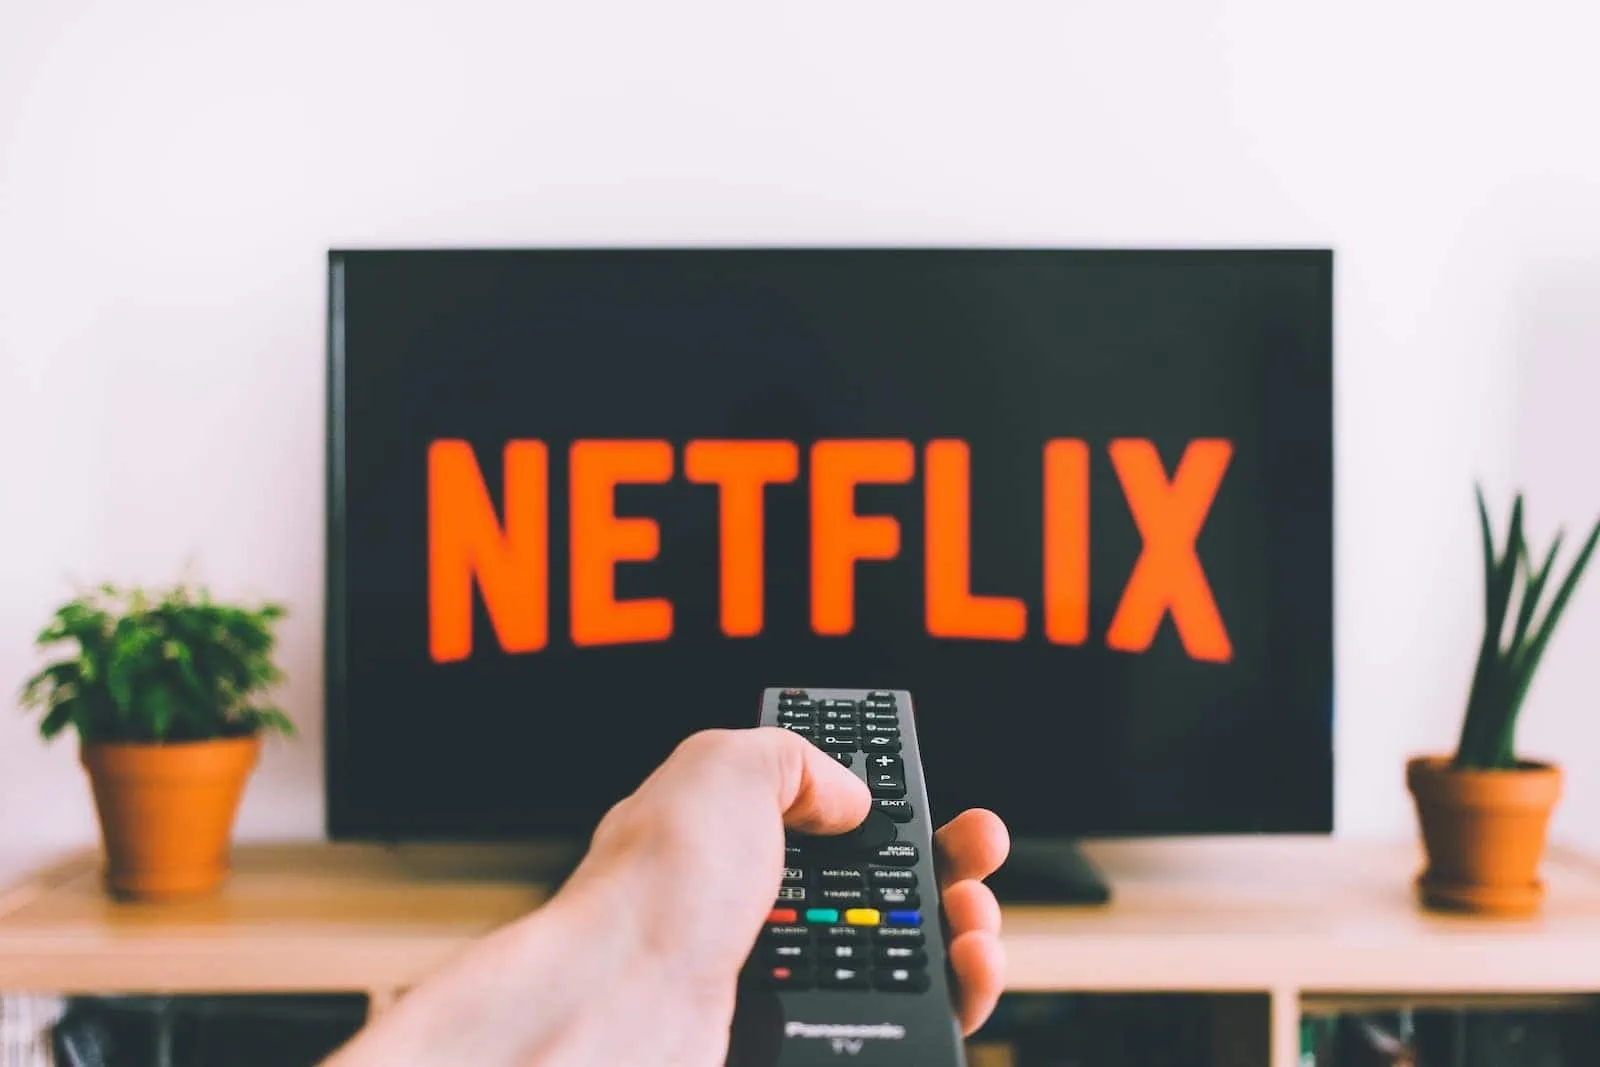 How to make money with Netflix